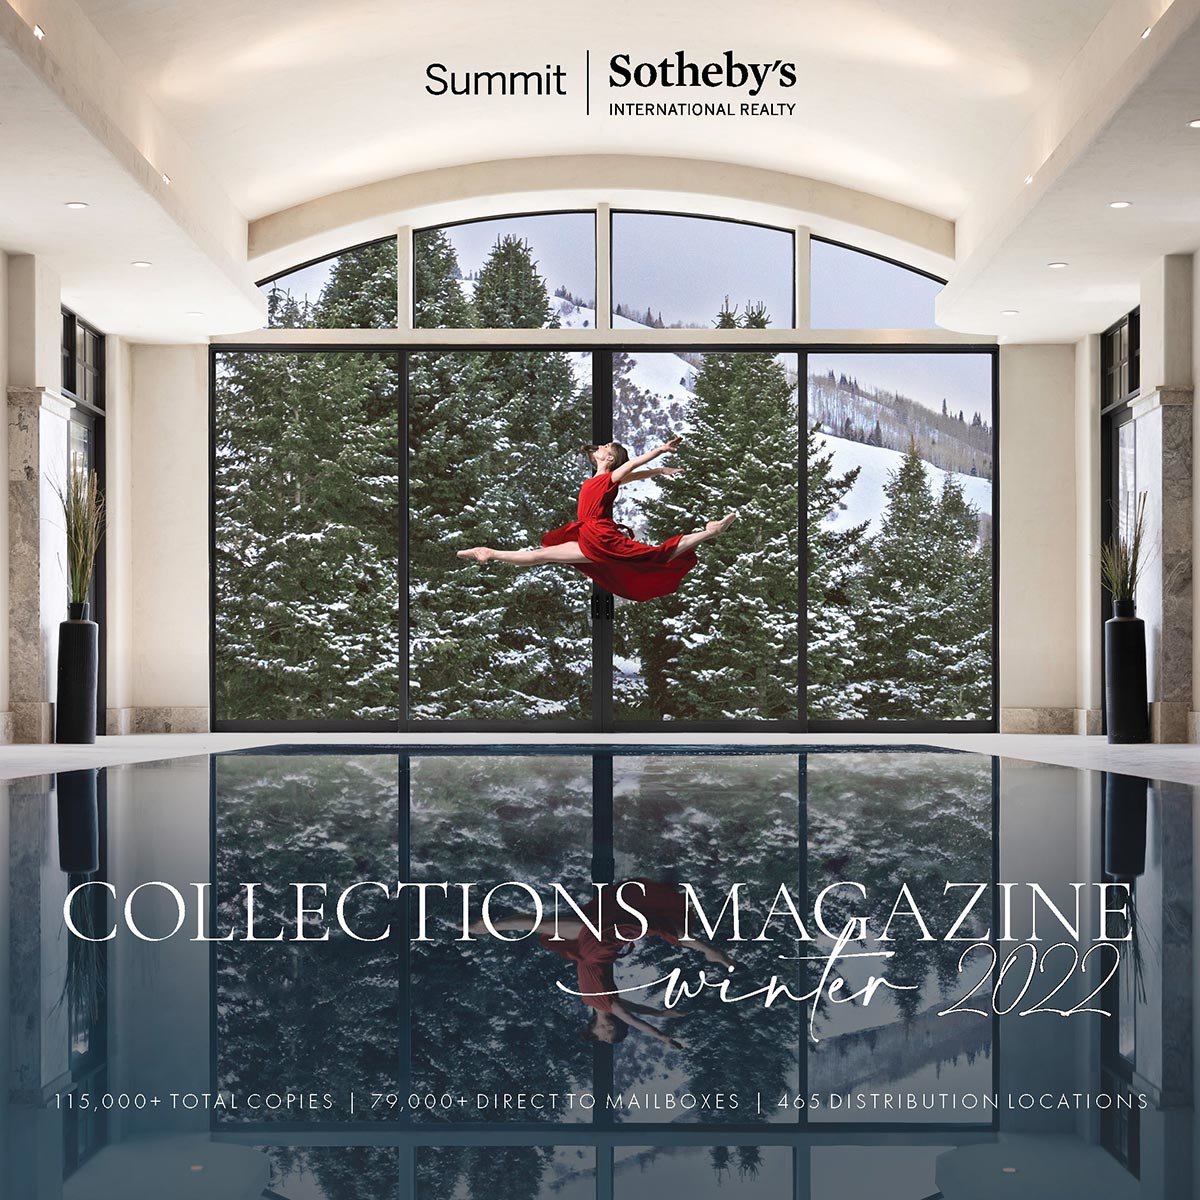 Summit Sotheby's Collections Magazine Winter 2022